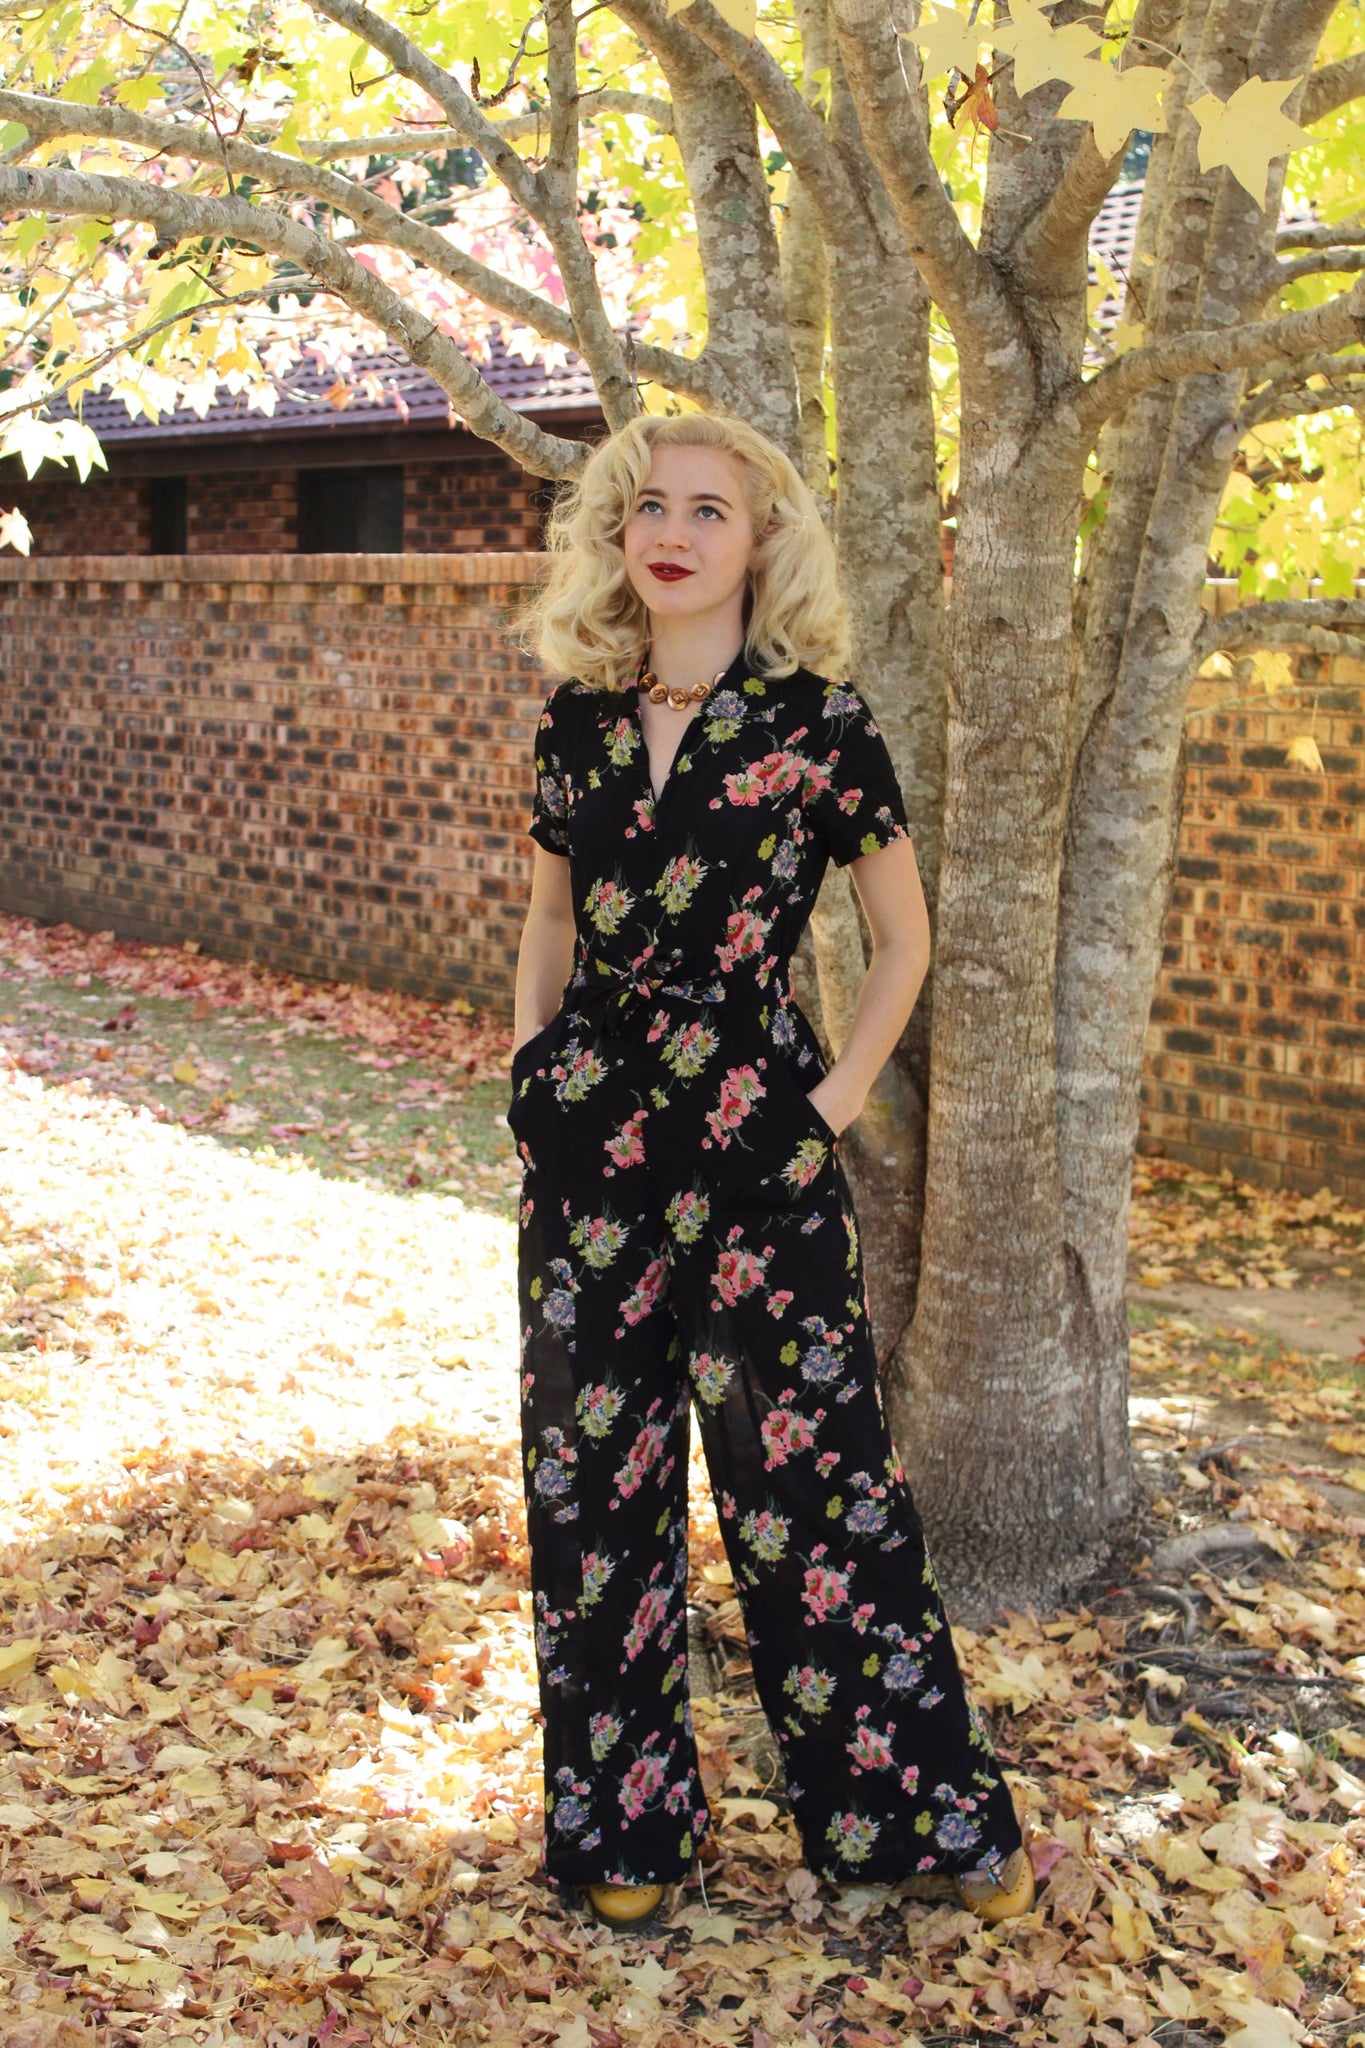 "Lauren" Siren Suit in Mayflower Plrint, Classic 1940s Vintage Holywood Style Inspired - True and authentic vintage style clothing, inspired by the Classic styles of CC41 , WW2 and the fun 1950s RocknRoll era, for everyday wear plus events like Goodwood Revival, Twinwood Festival and Viva Las Vegas Rockabilly Weekend Rock n Romance The Seamstress Of Bloomsbury